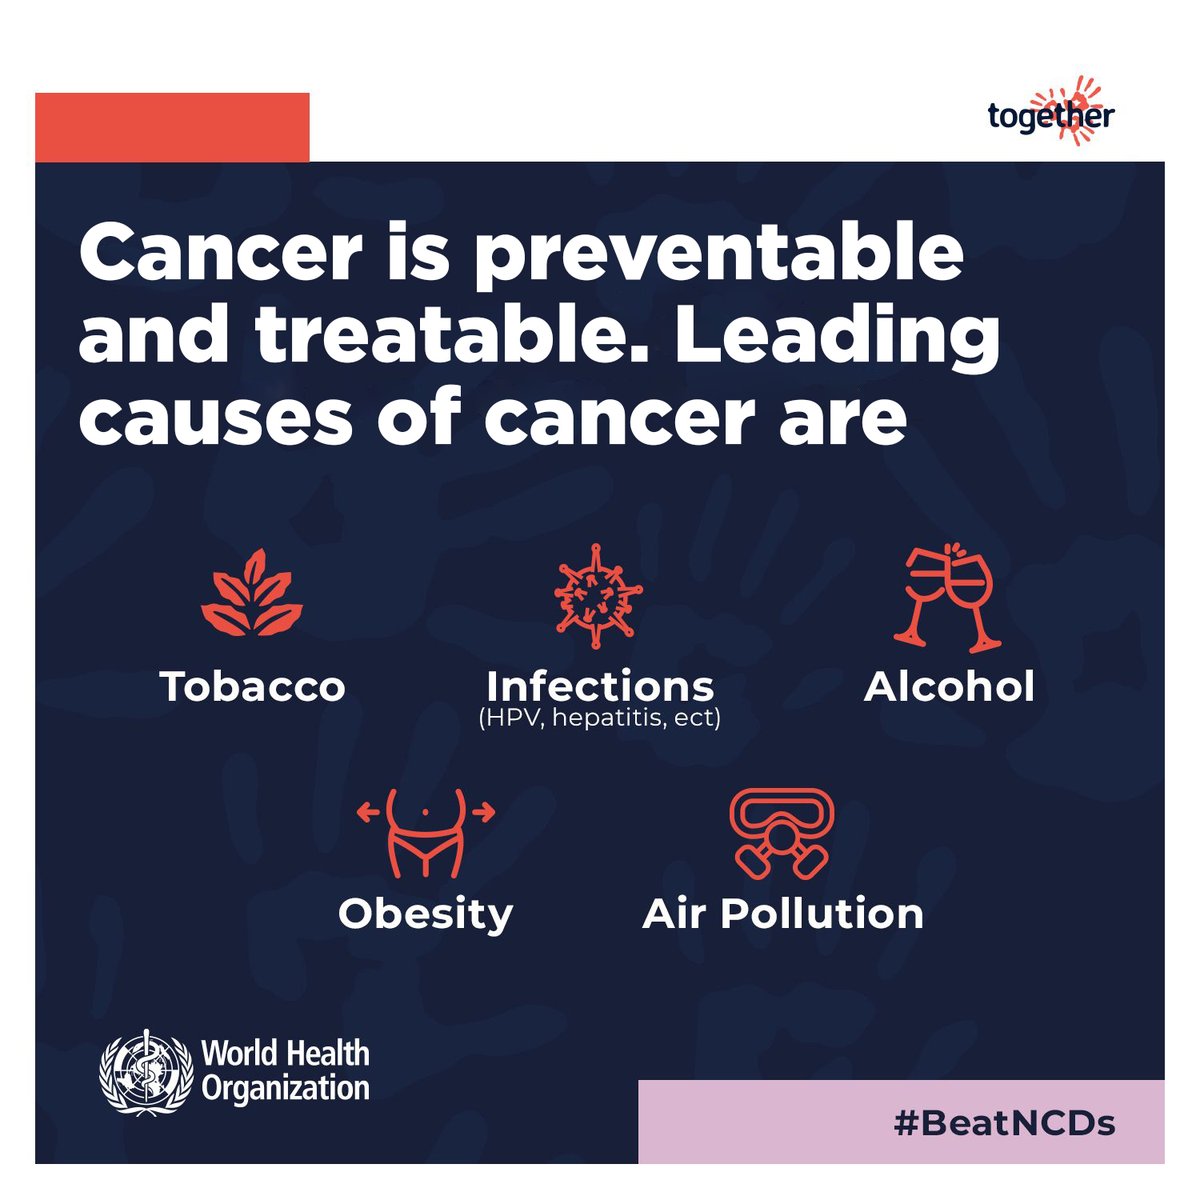 #Cancer risk factors include: 🔴 Tobacco use 🔴 Being overweight or obese 🔴 Unhealthy diet 🔴 Lack of physical activity 🔴 Alcohol use 🔴 Sexually transmitted HPV-infection 🔴 Urban air pollution Let's beat cancer!